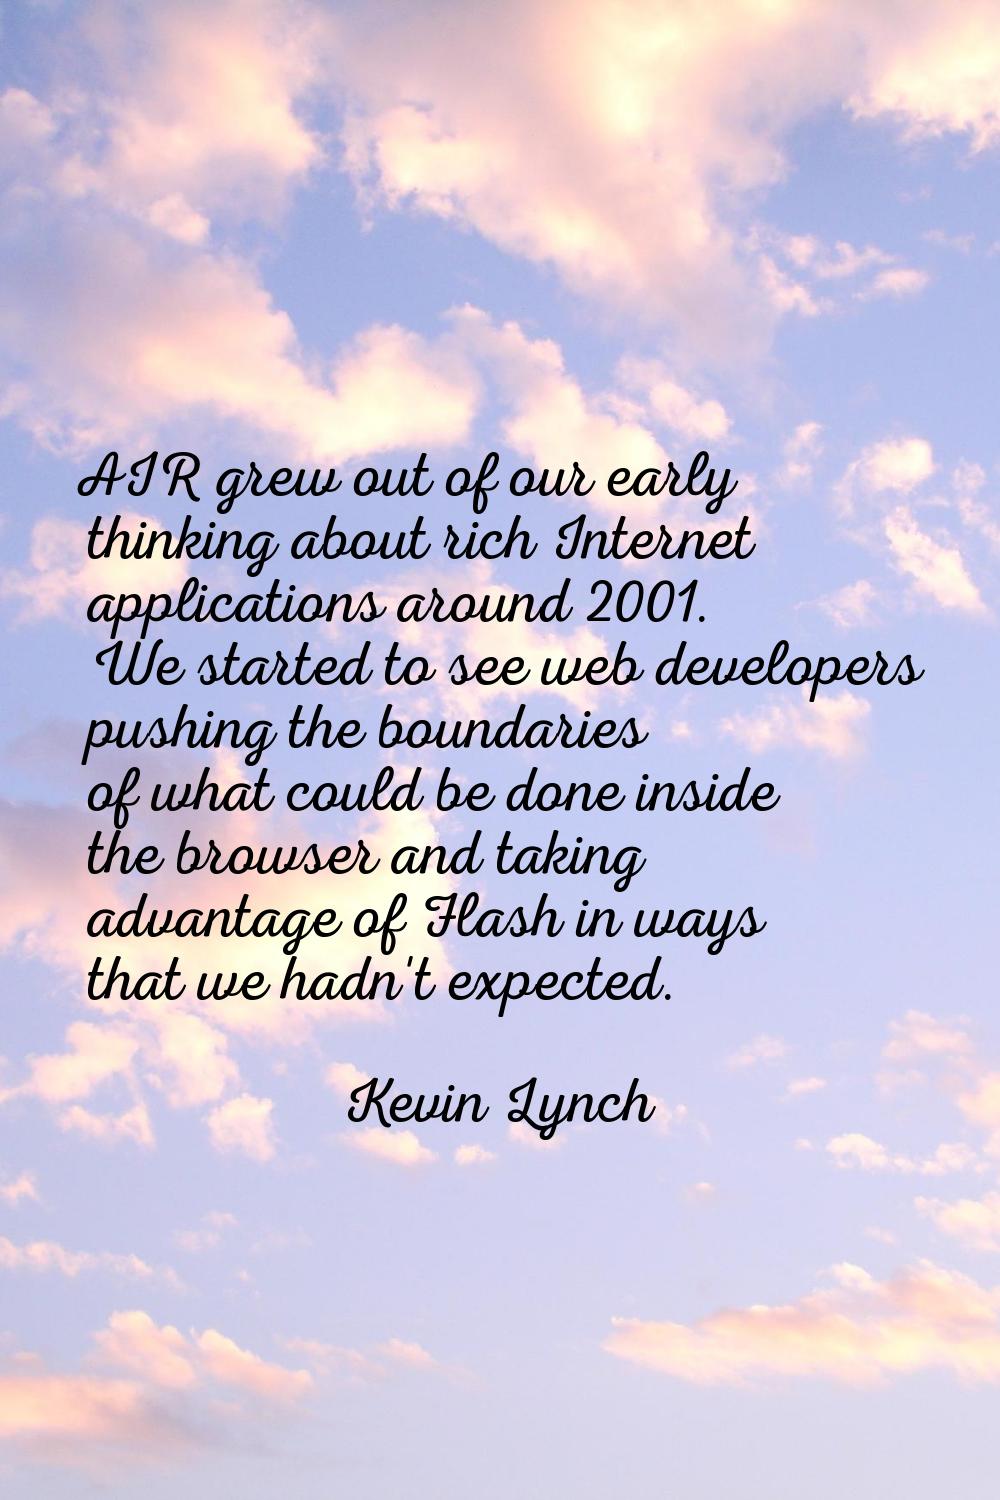 AIR grew out of our early thinking about rich Internet applications around 2001. We started to see 